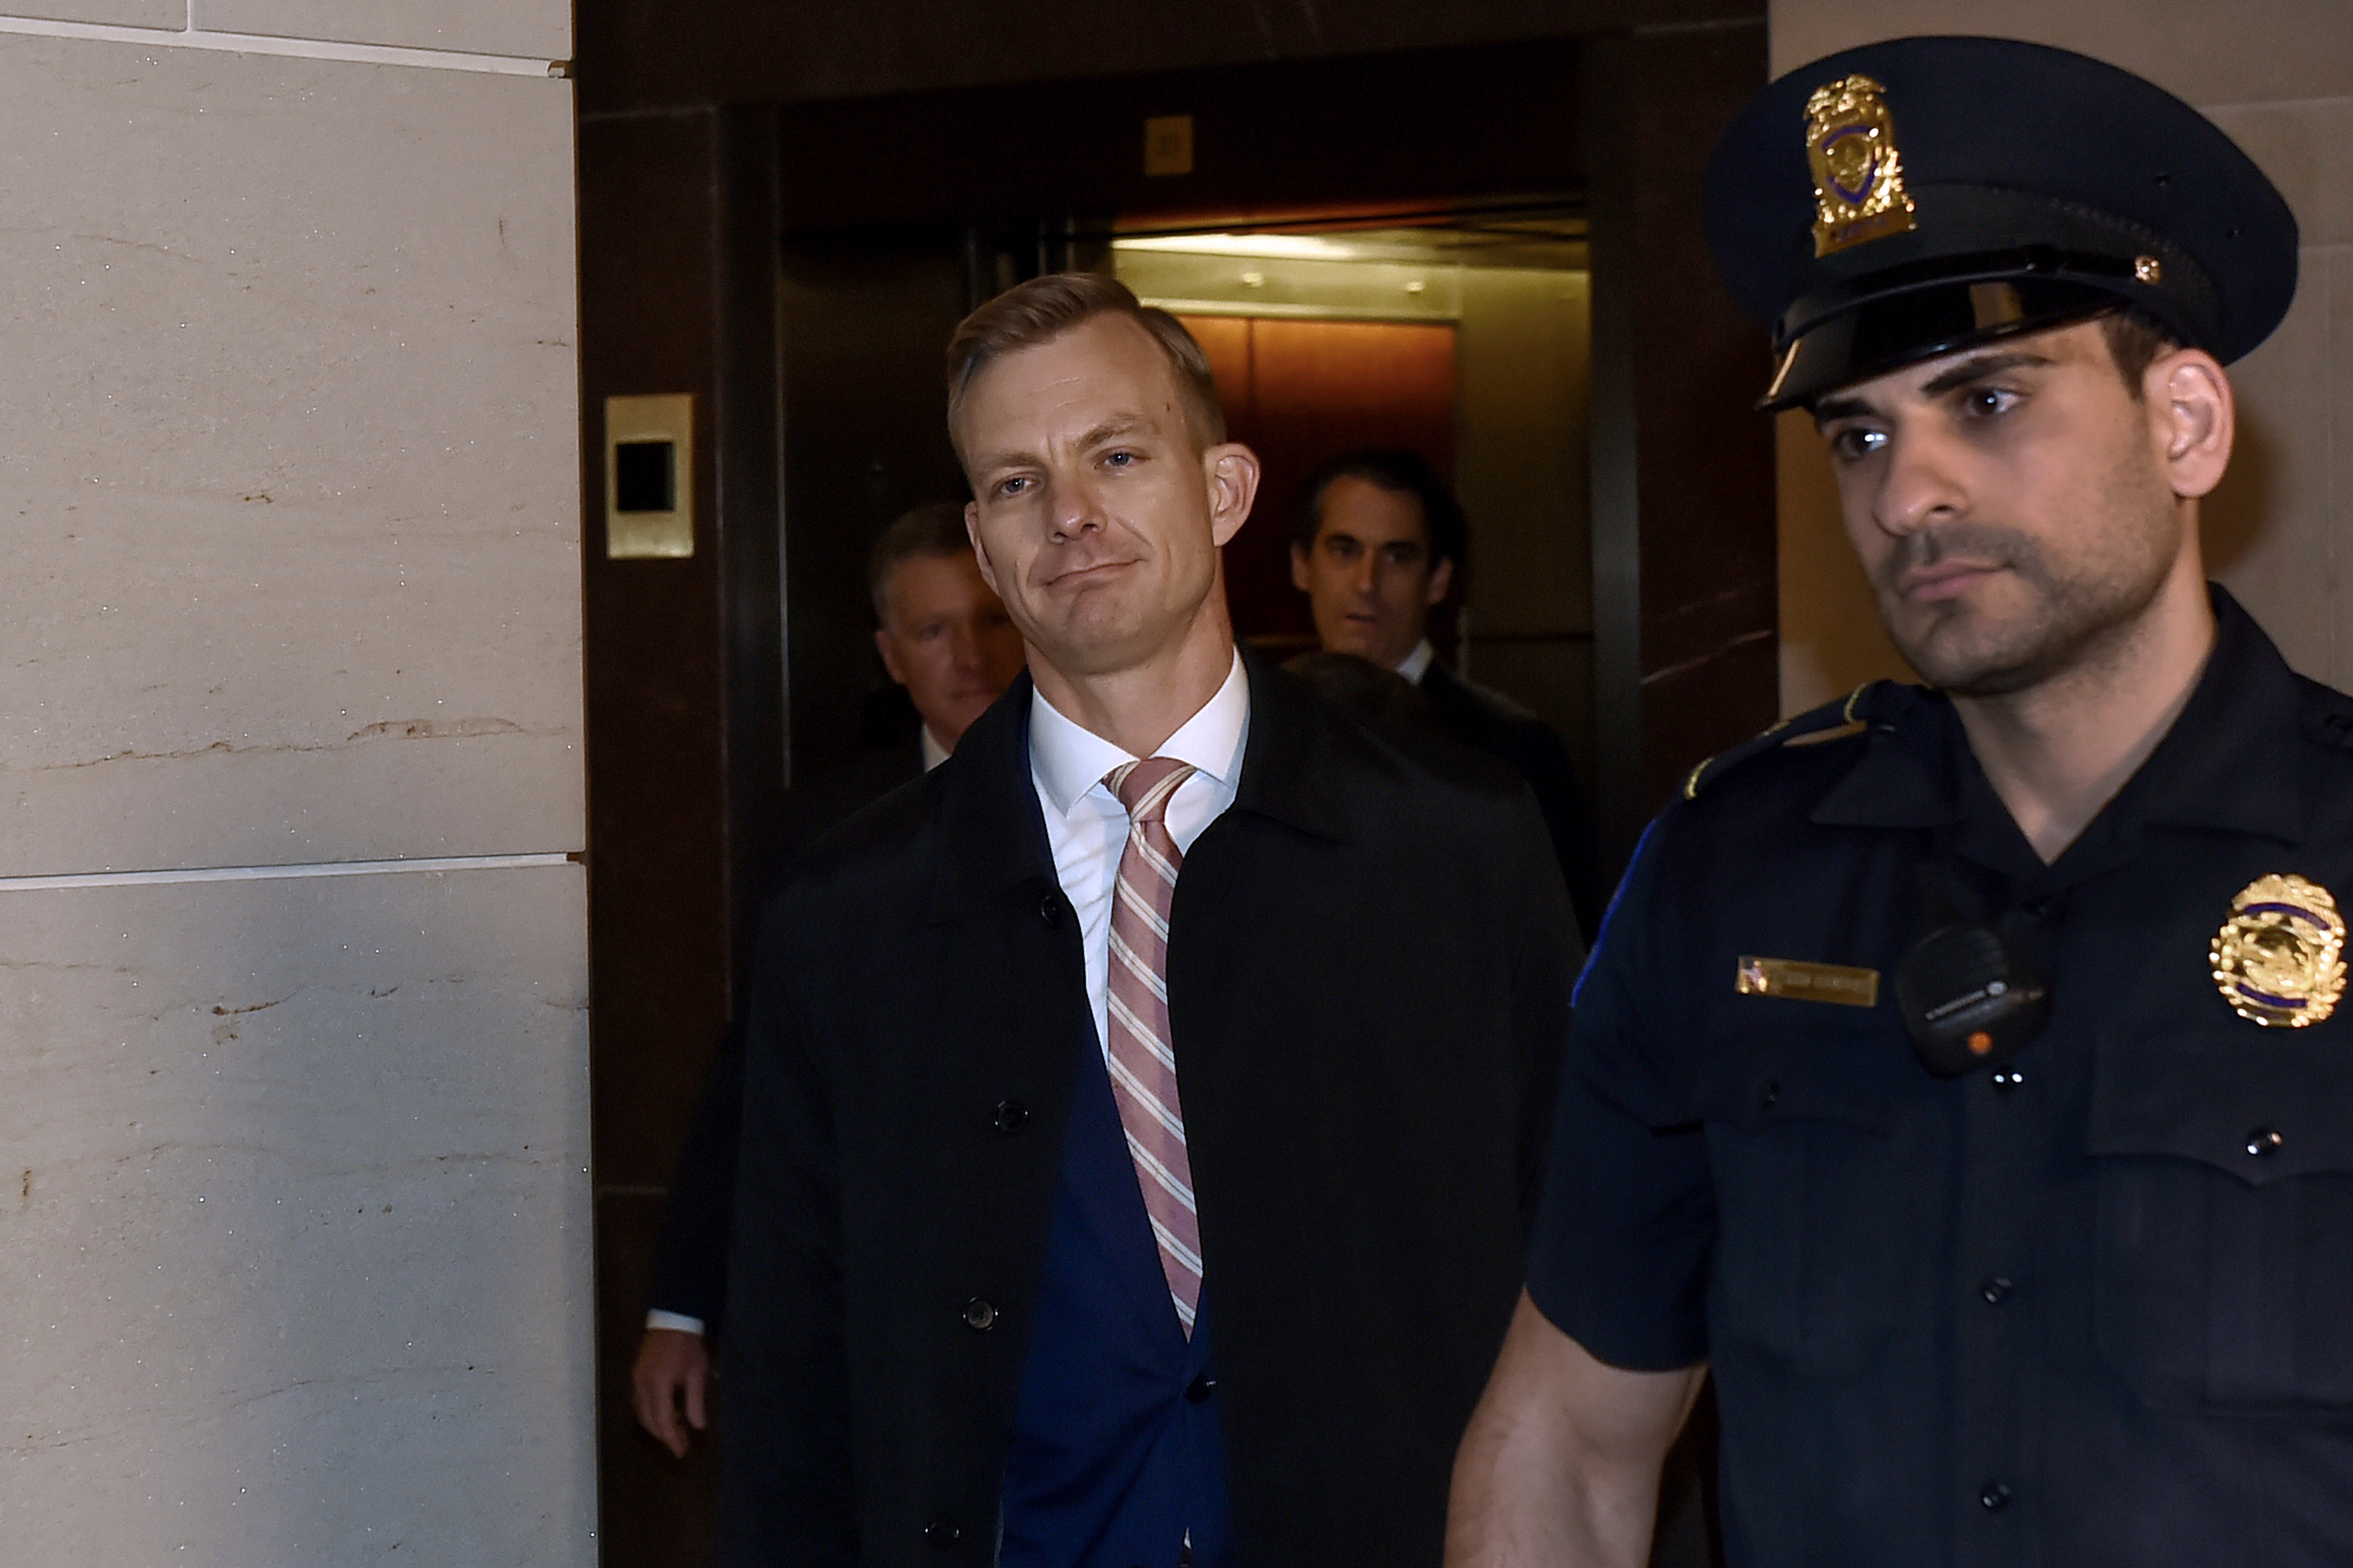 David Holmes, a State Department official, arrives to appear in a closed-door deposition hearing as part of the impeachment inquiry at the US Capitol in Washington, DC, on November 15, 2019. (OLIVIER DOULIERY/AFP via Getty Images)